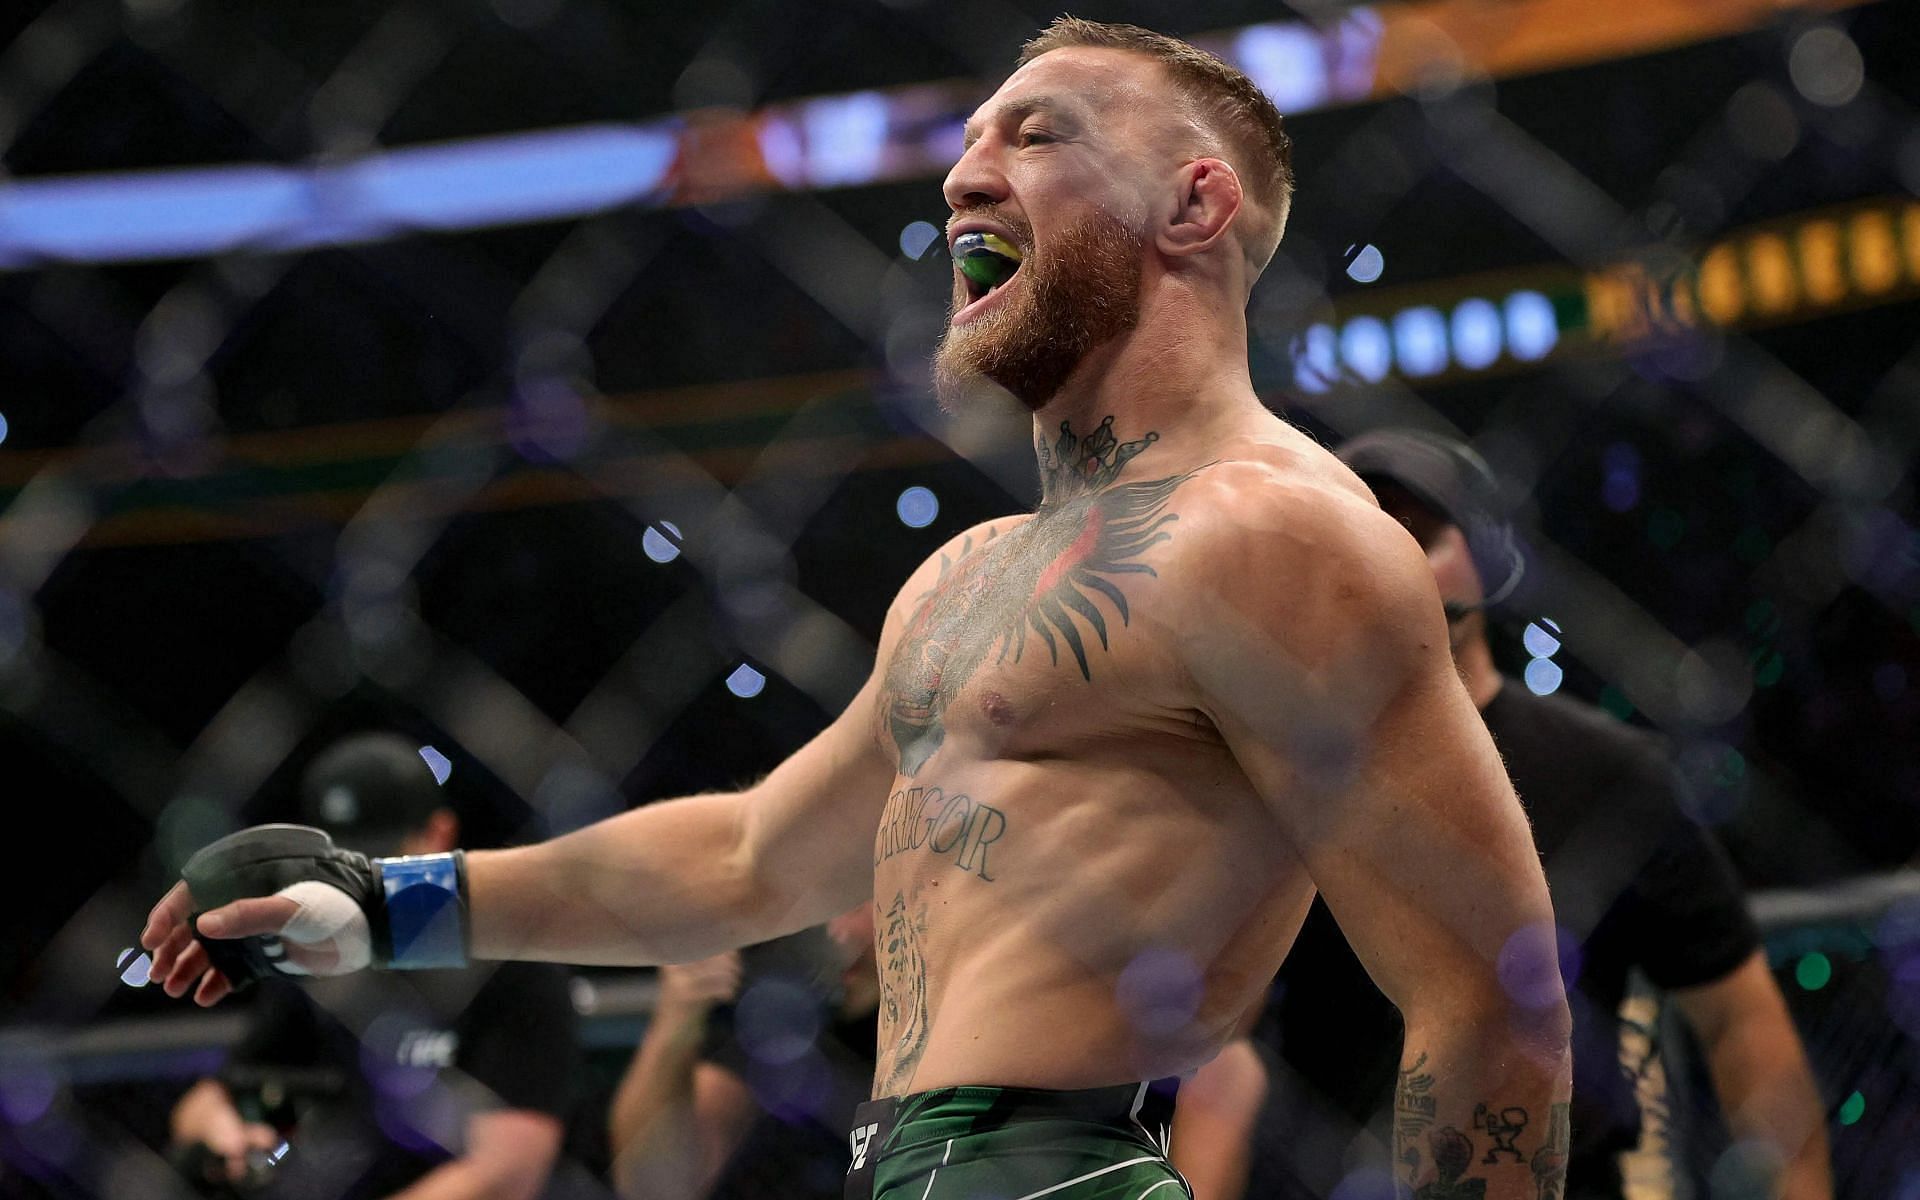 Conor McGregor is currently sidelined from UFC action due to an injury